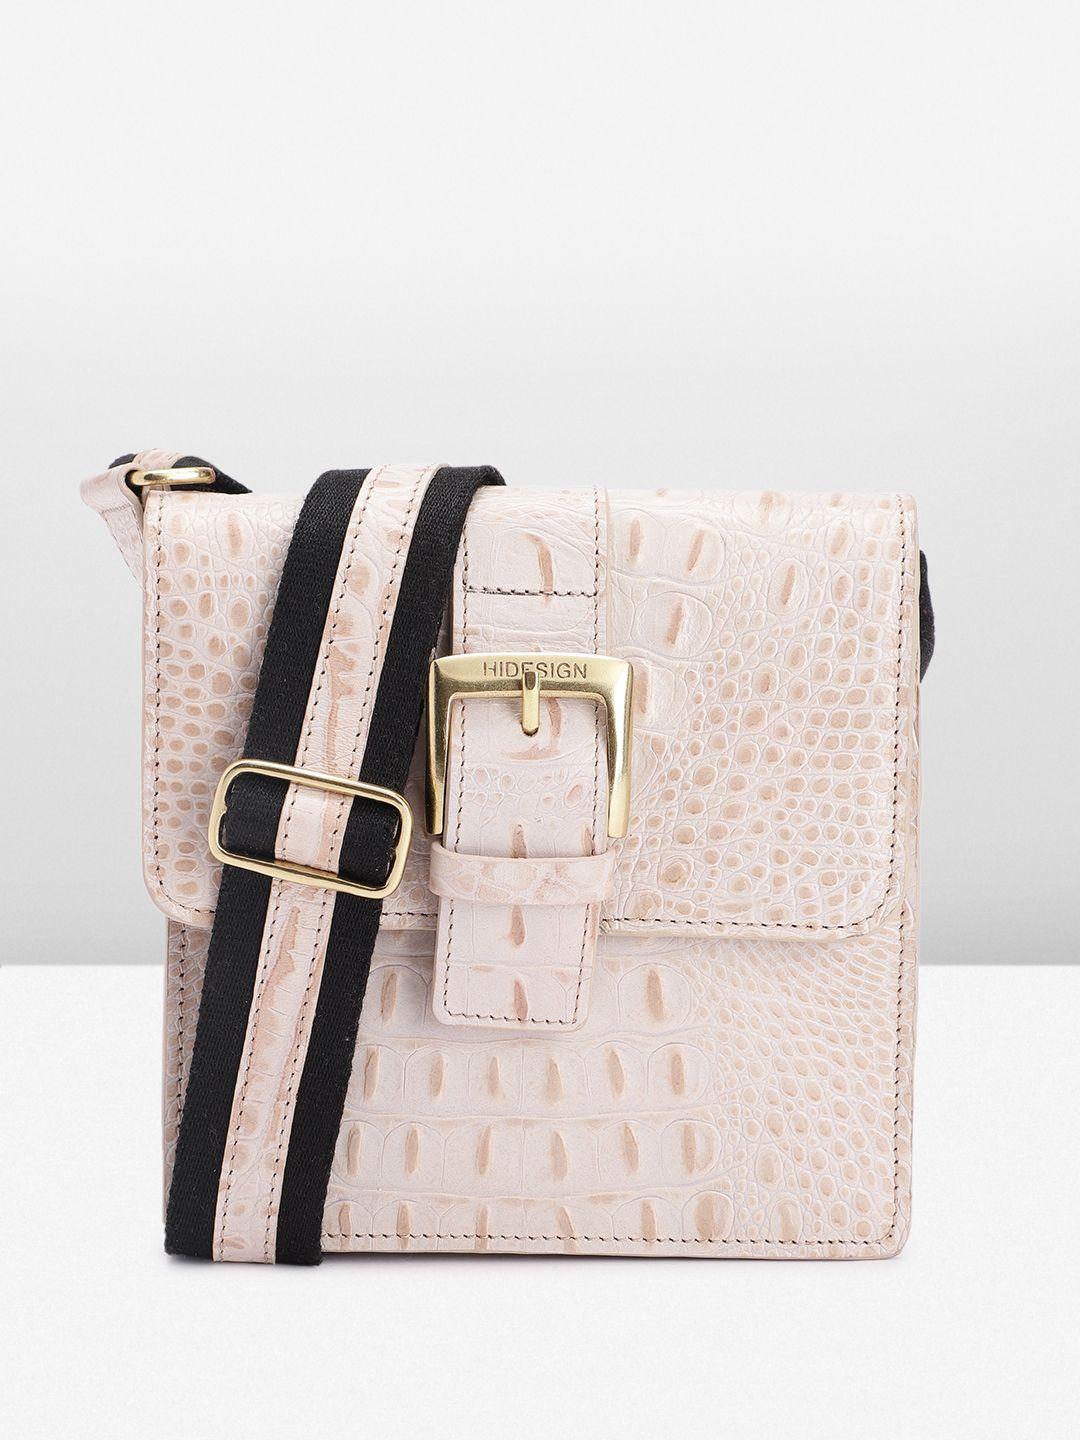 hidesign off white textured leather sling bag